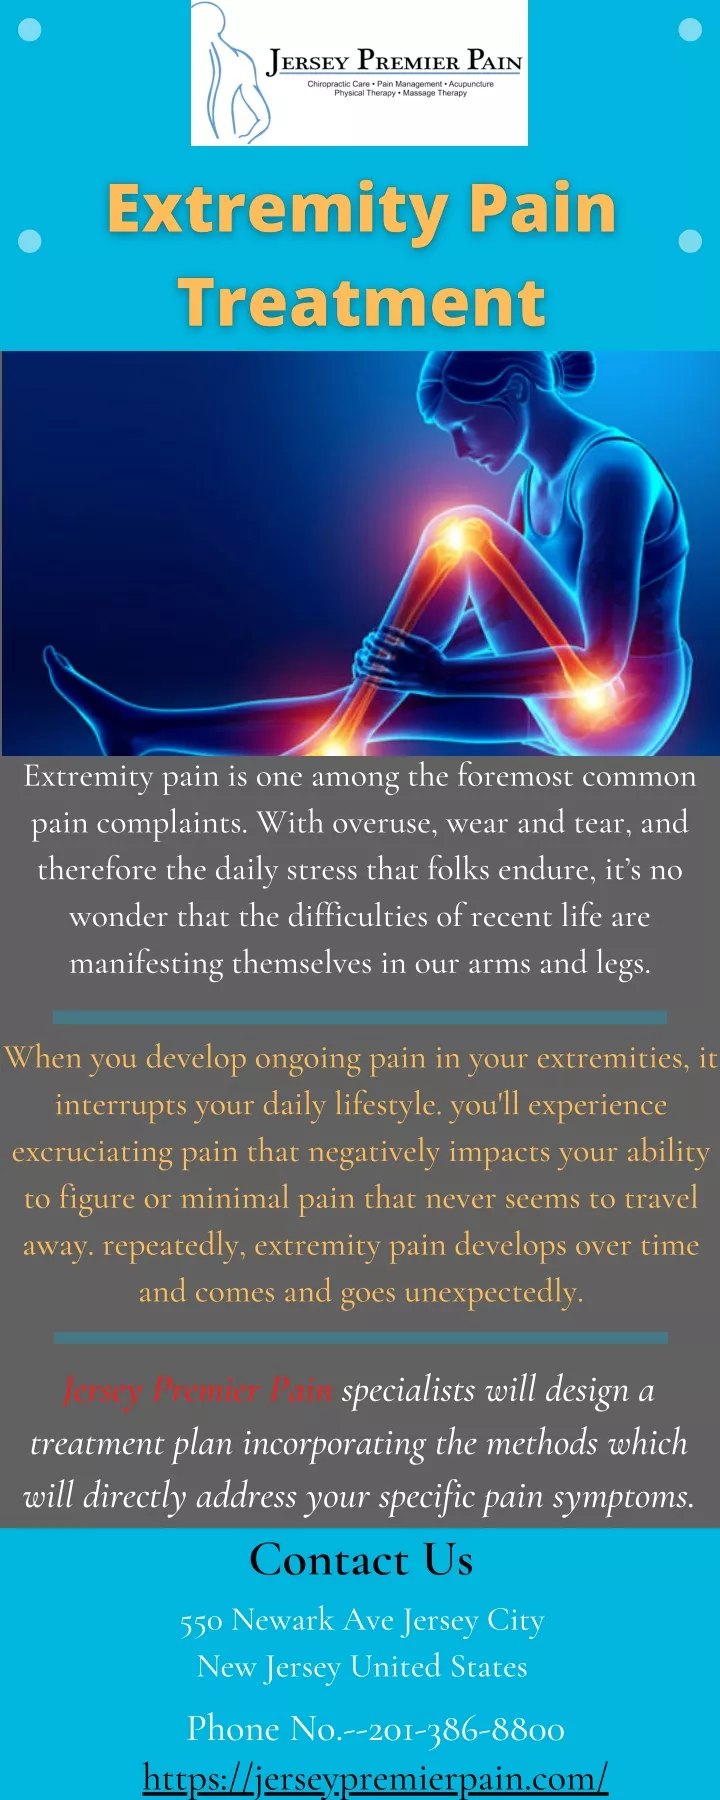 extremity pain is one among the foremost common